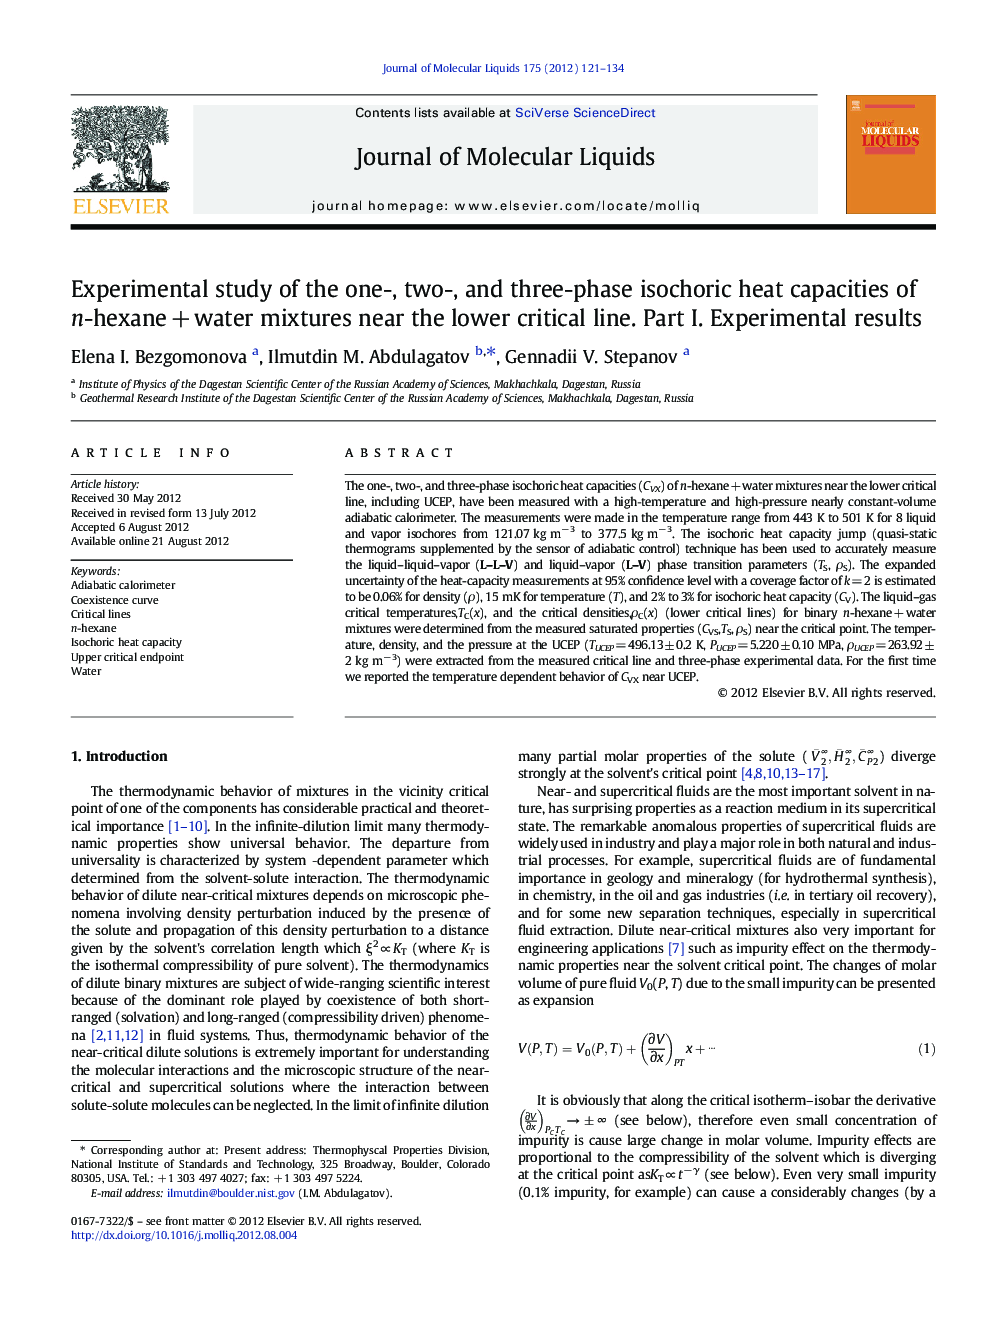 Experimental study of the one-, two-, and three-phase isochoric heat capacities of n-hexaneÂ +Â water mixtures near the lower critical line. Part I. Experimental results